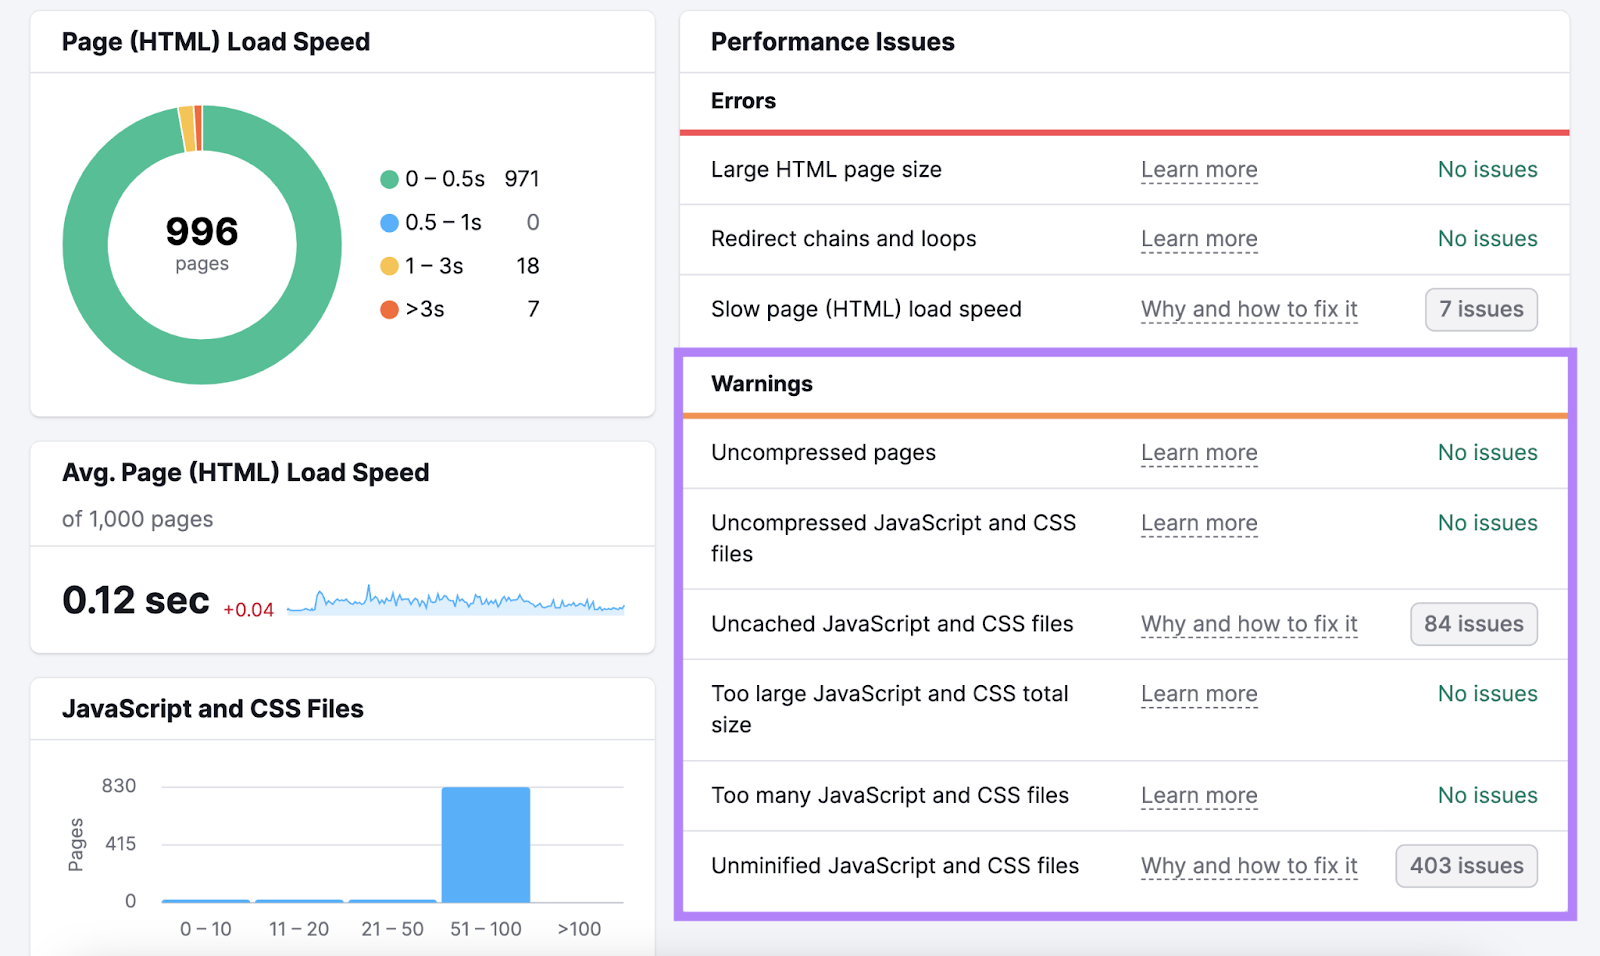 site performance warnings highlighted, such as uncompressed pages, uncached files, and unminified files